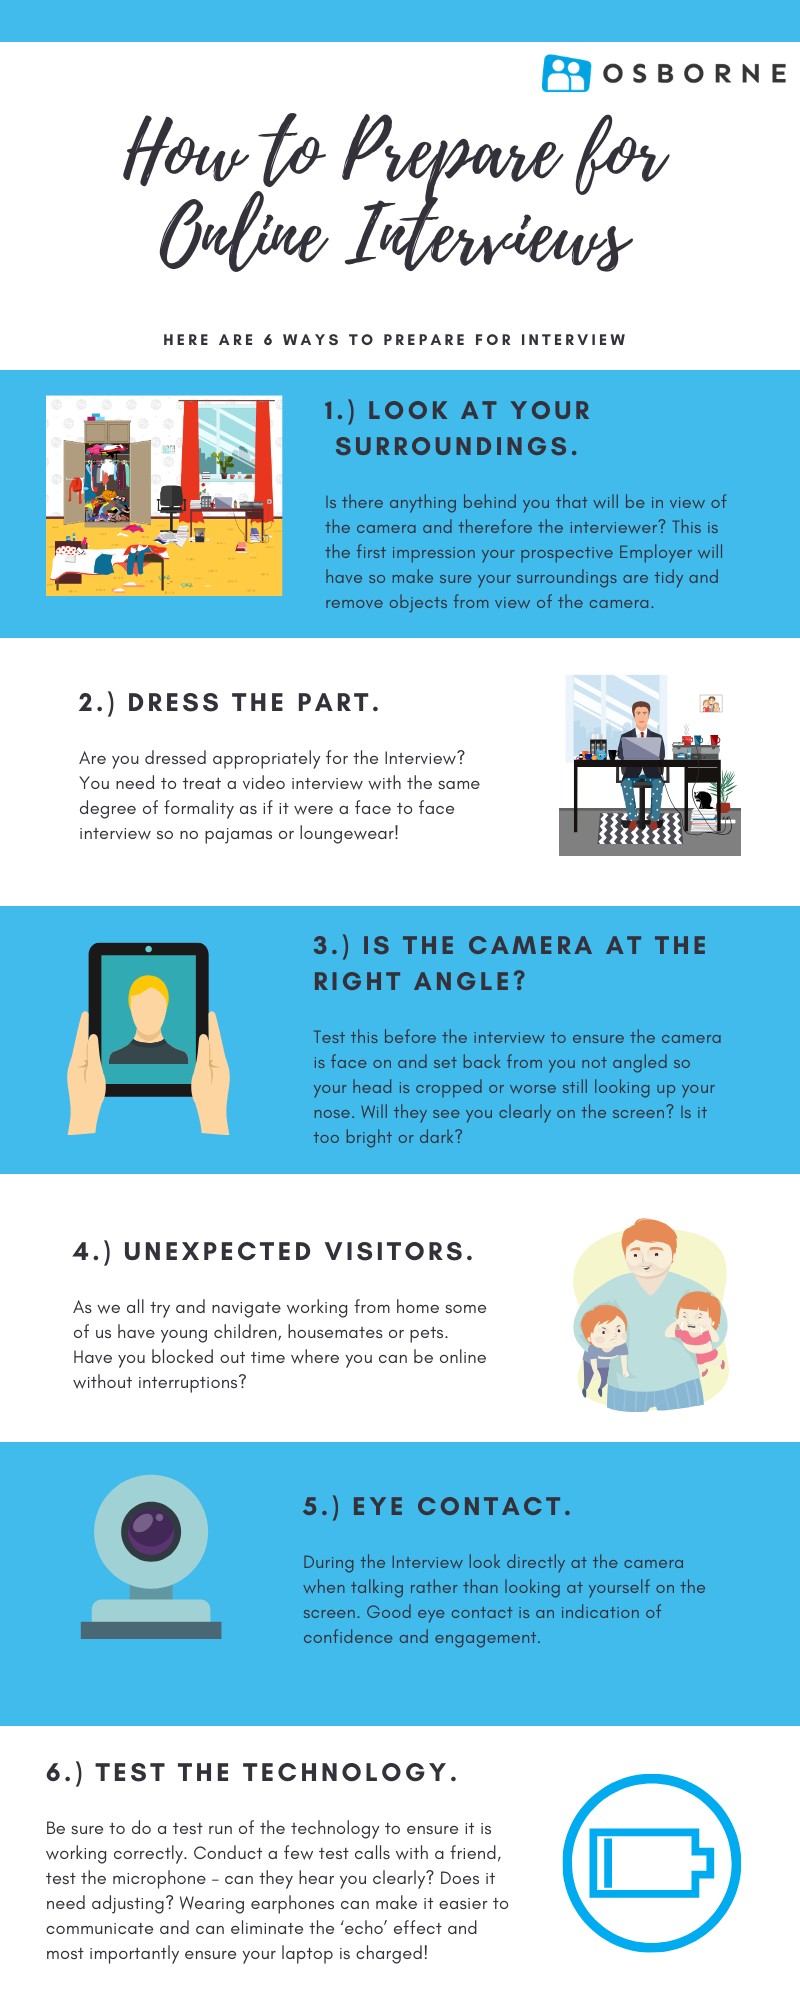 How to prepare for an online interview top tips infographic.
